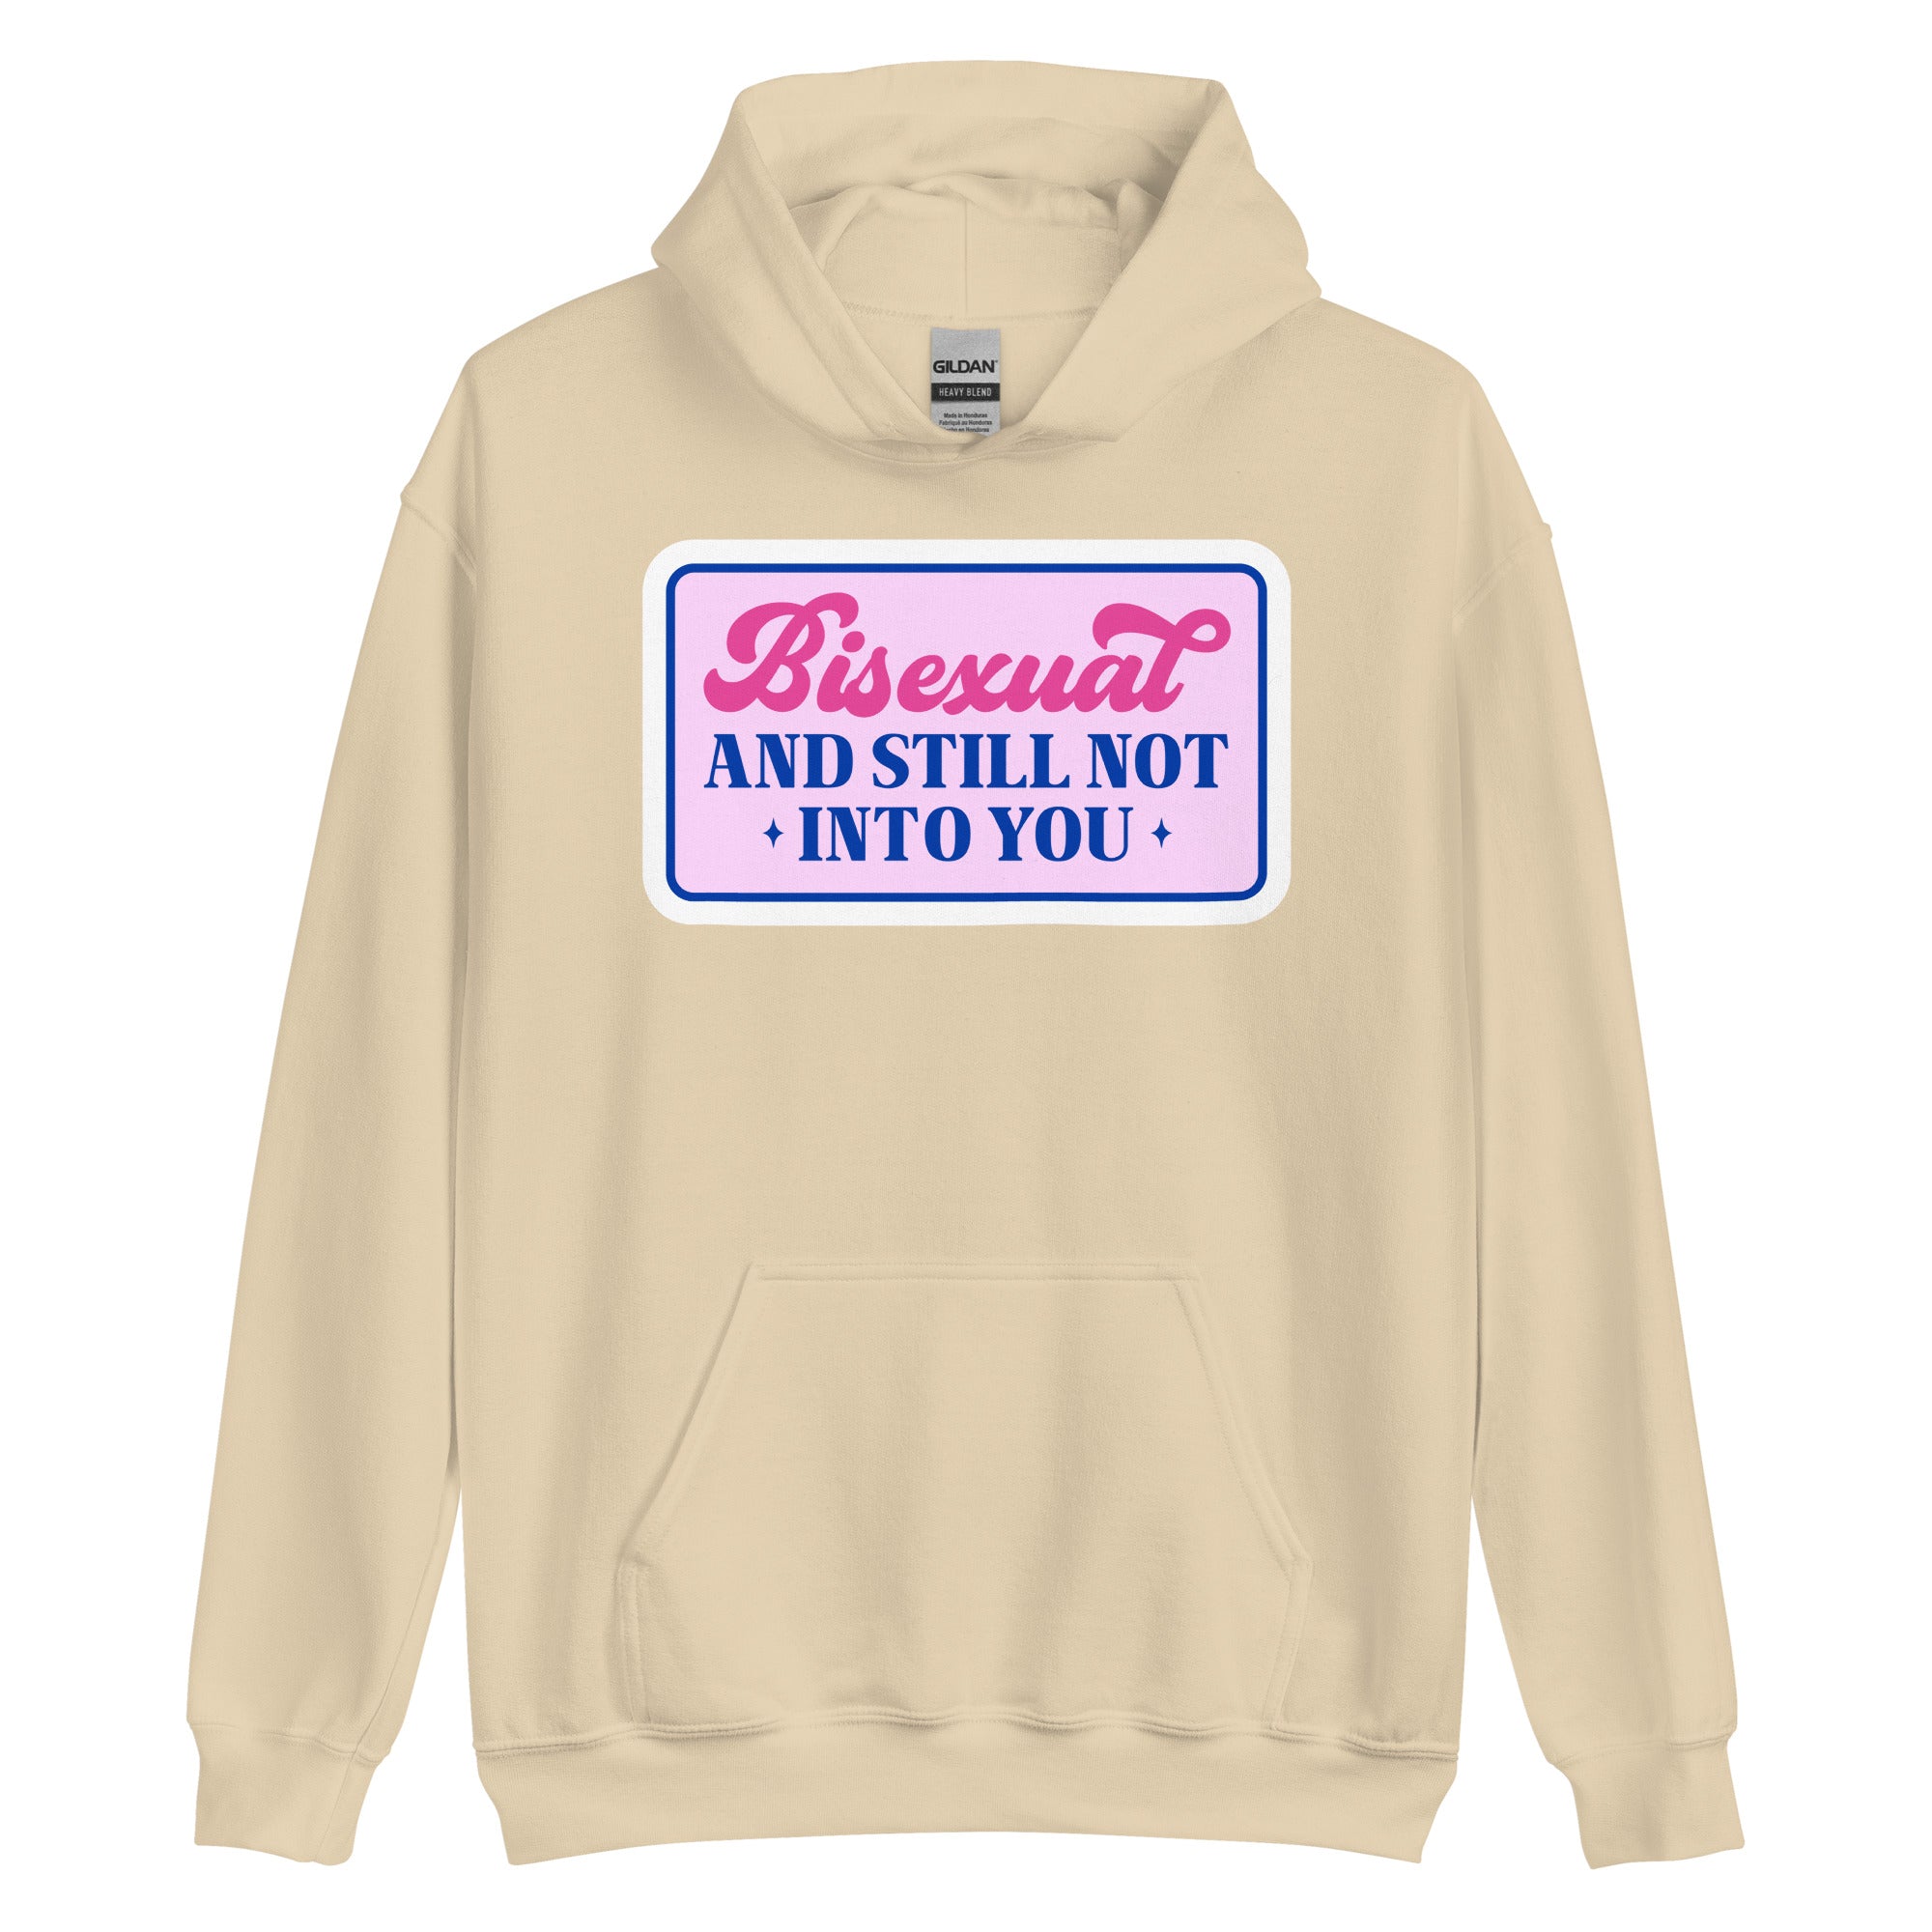 Bisexual AND STILL NOT INTO YOU Unisex Sweat Shirt